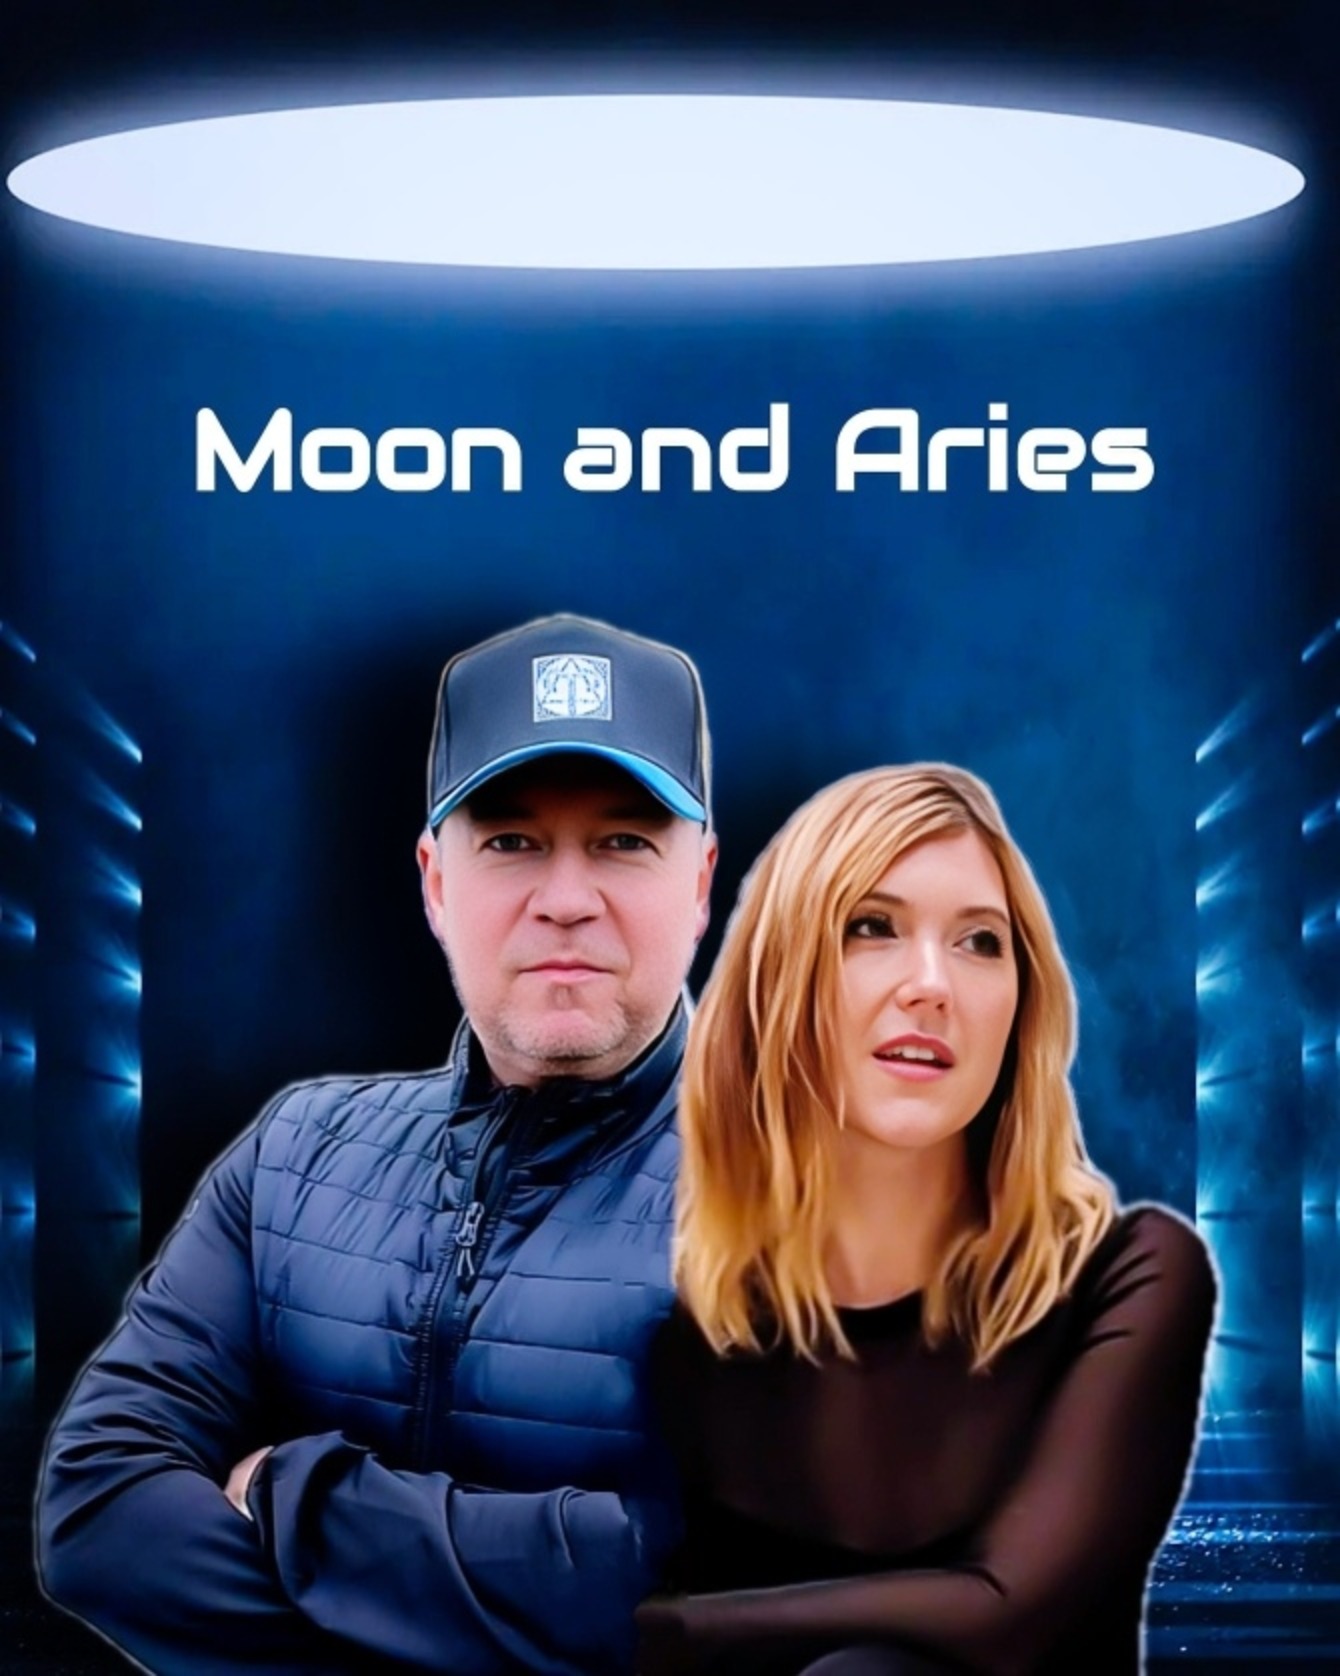 MOON AND ARIES